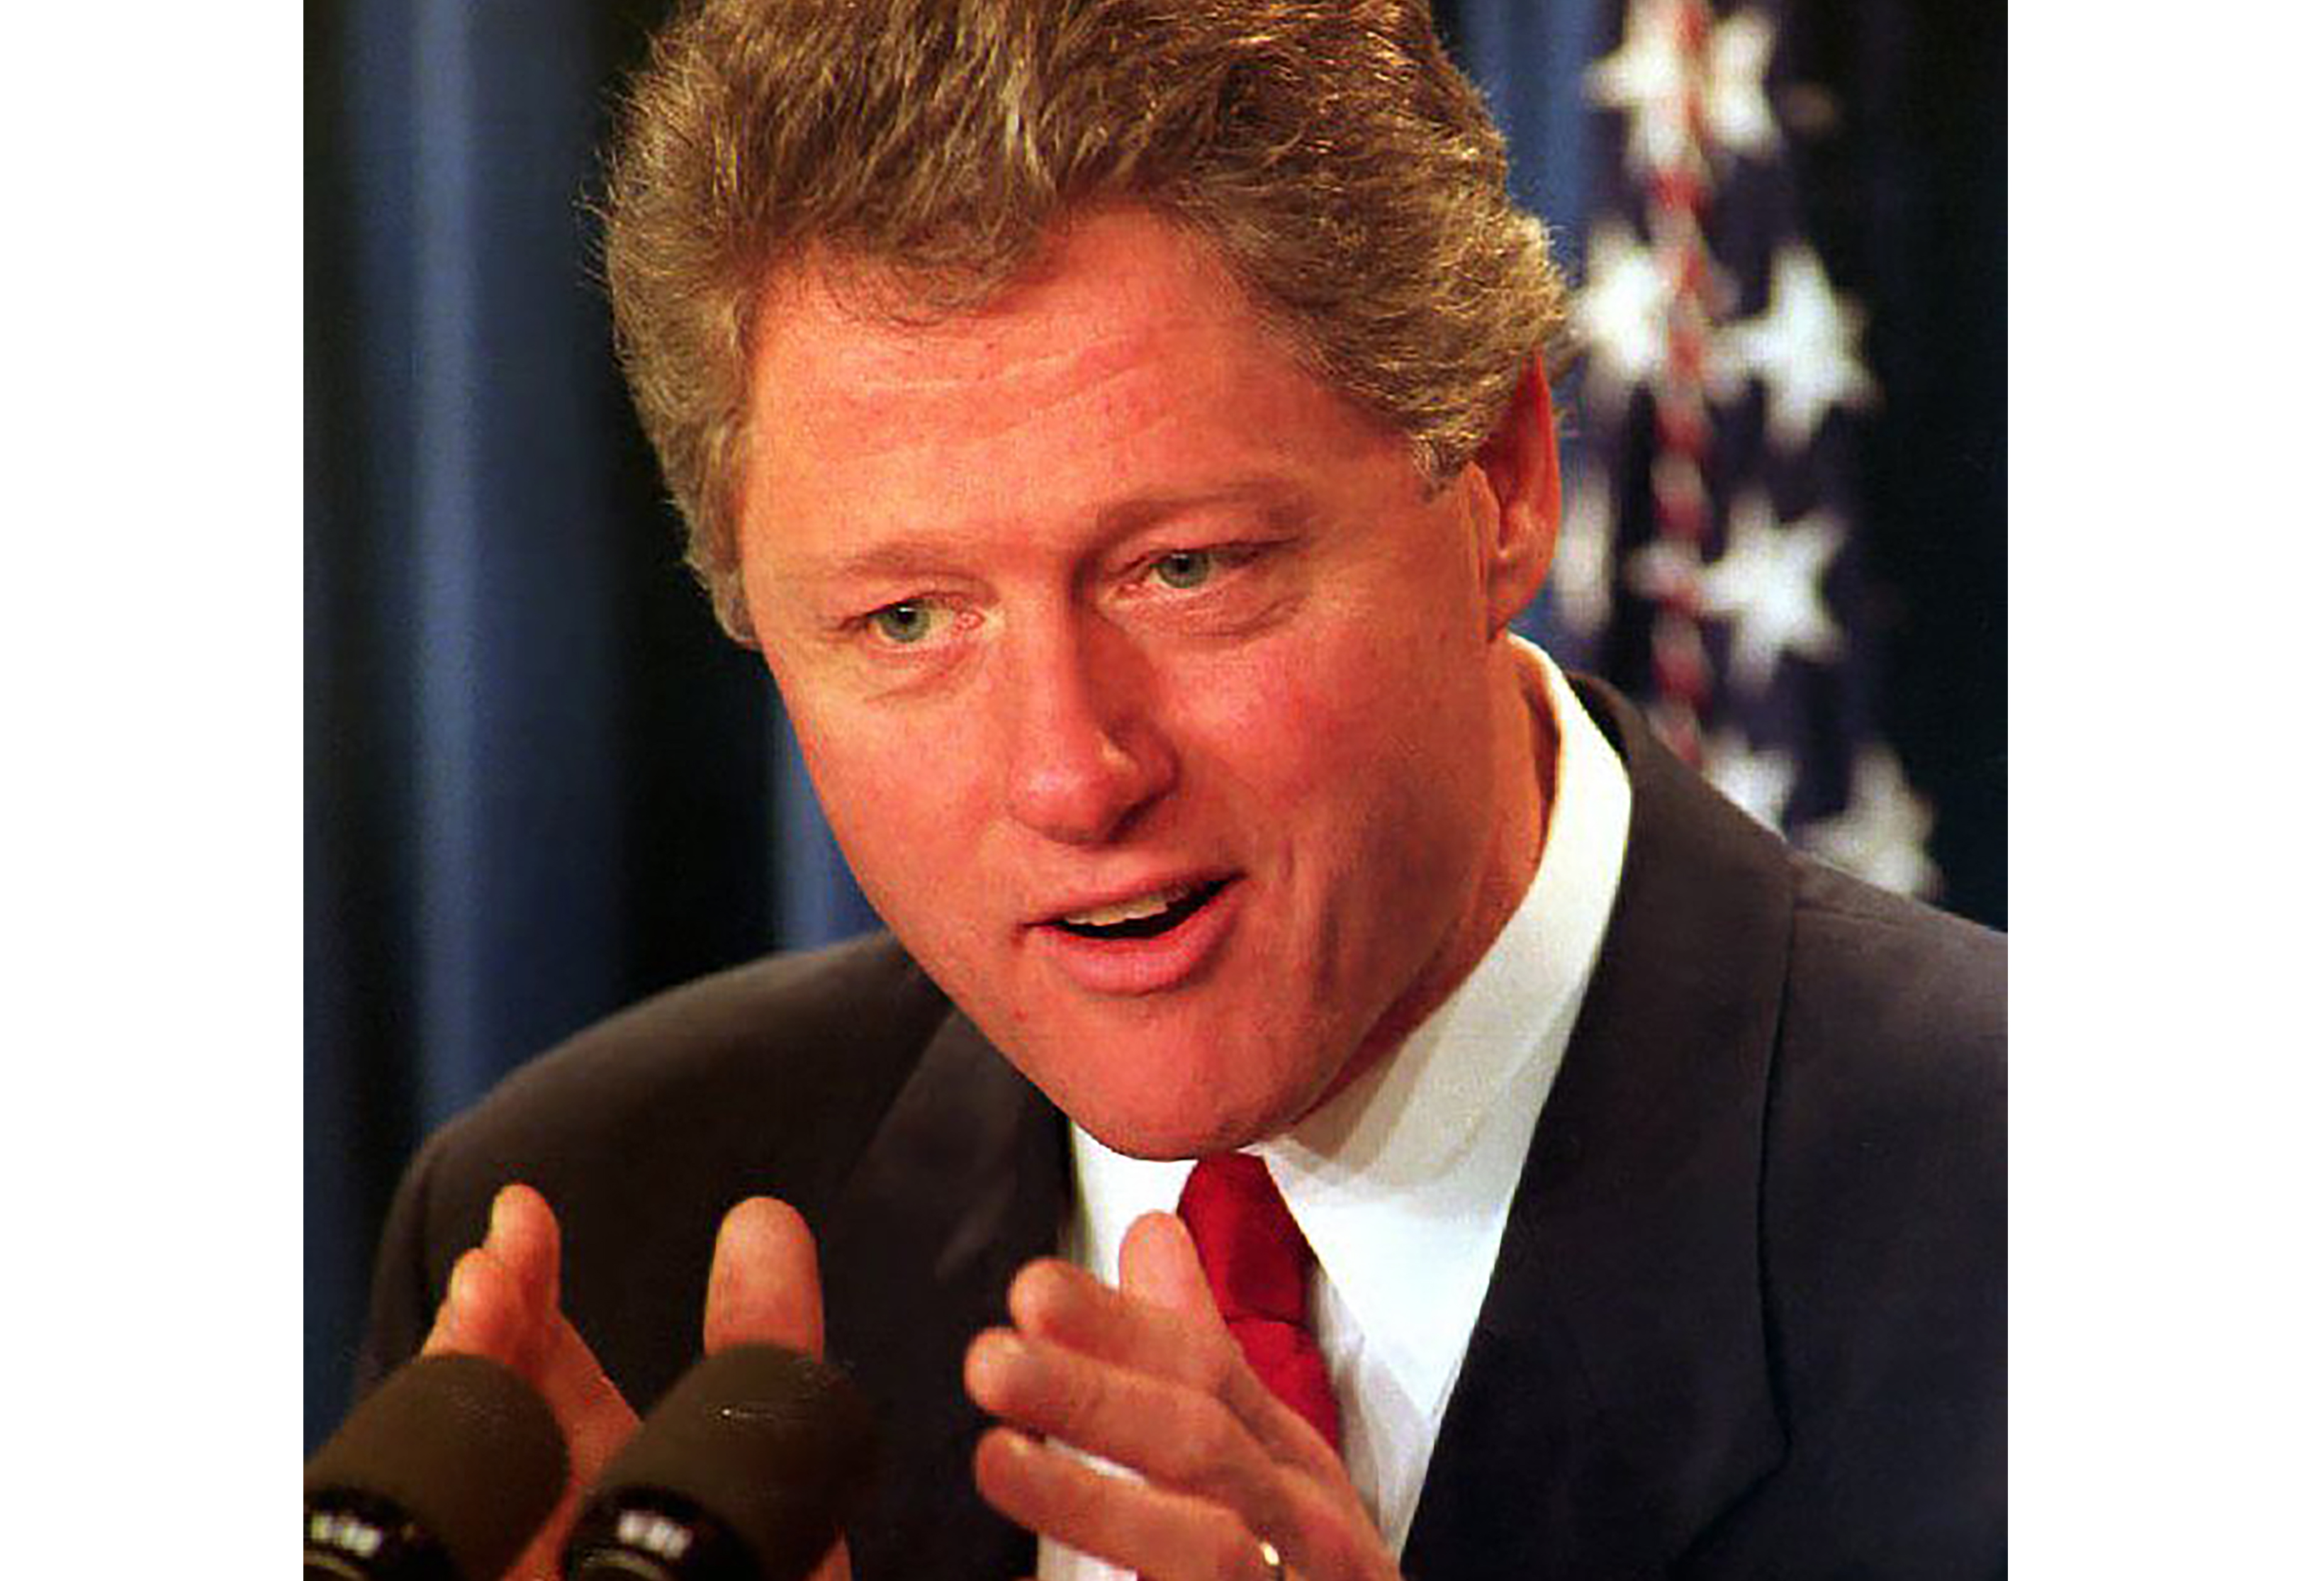 Bill Clinton Announces Don't Ask Don't Tell, 1993